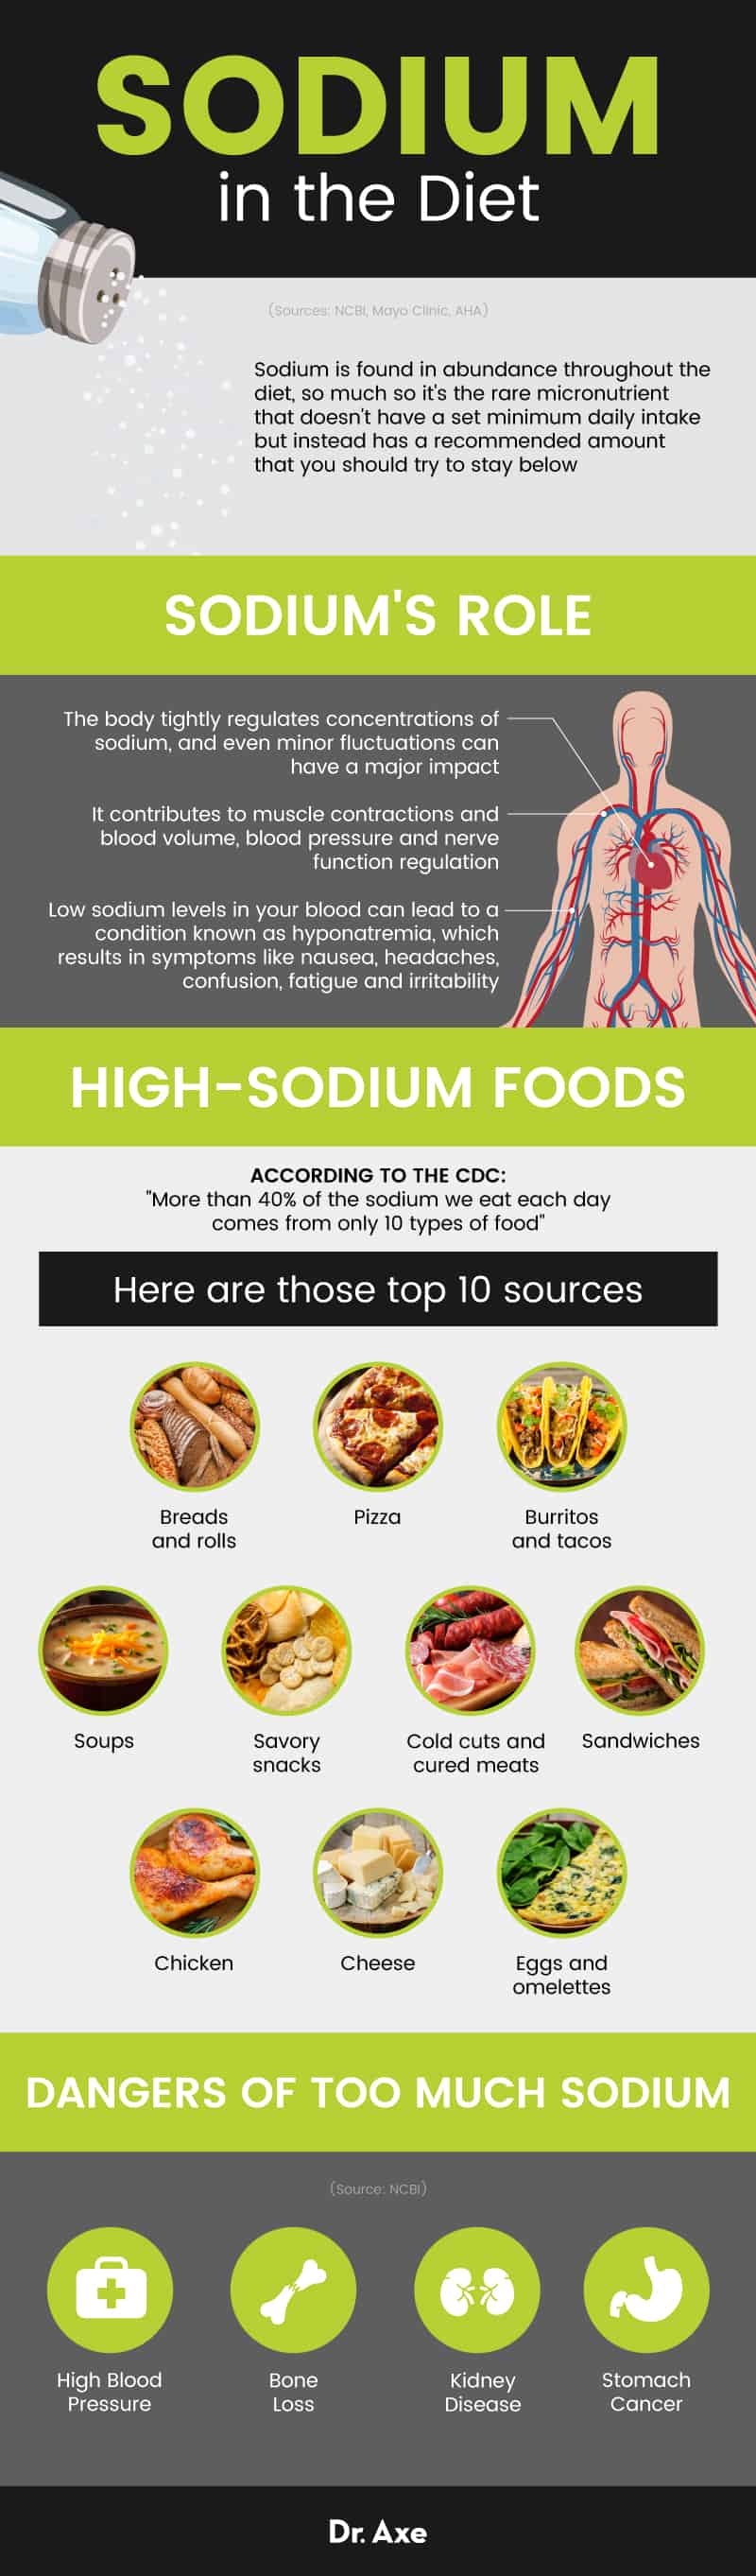 Foods high in sodium - Dr. Axe